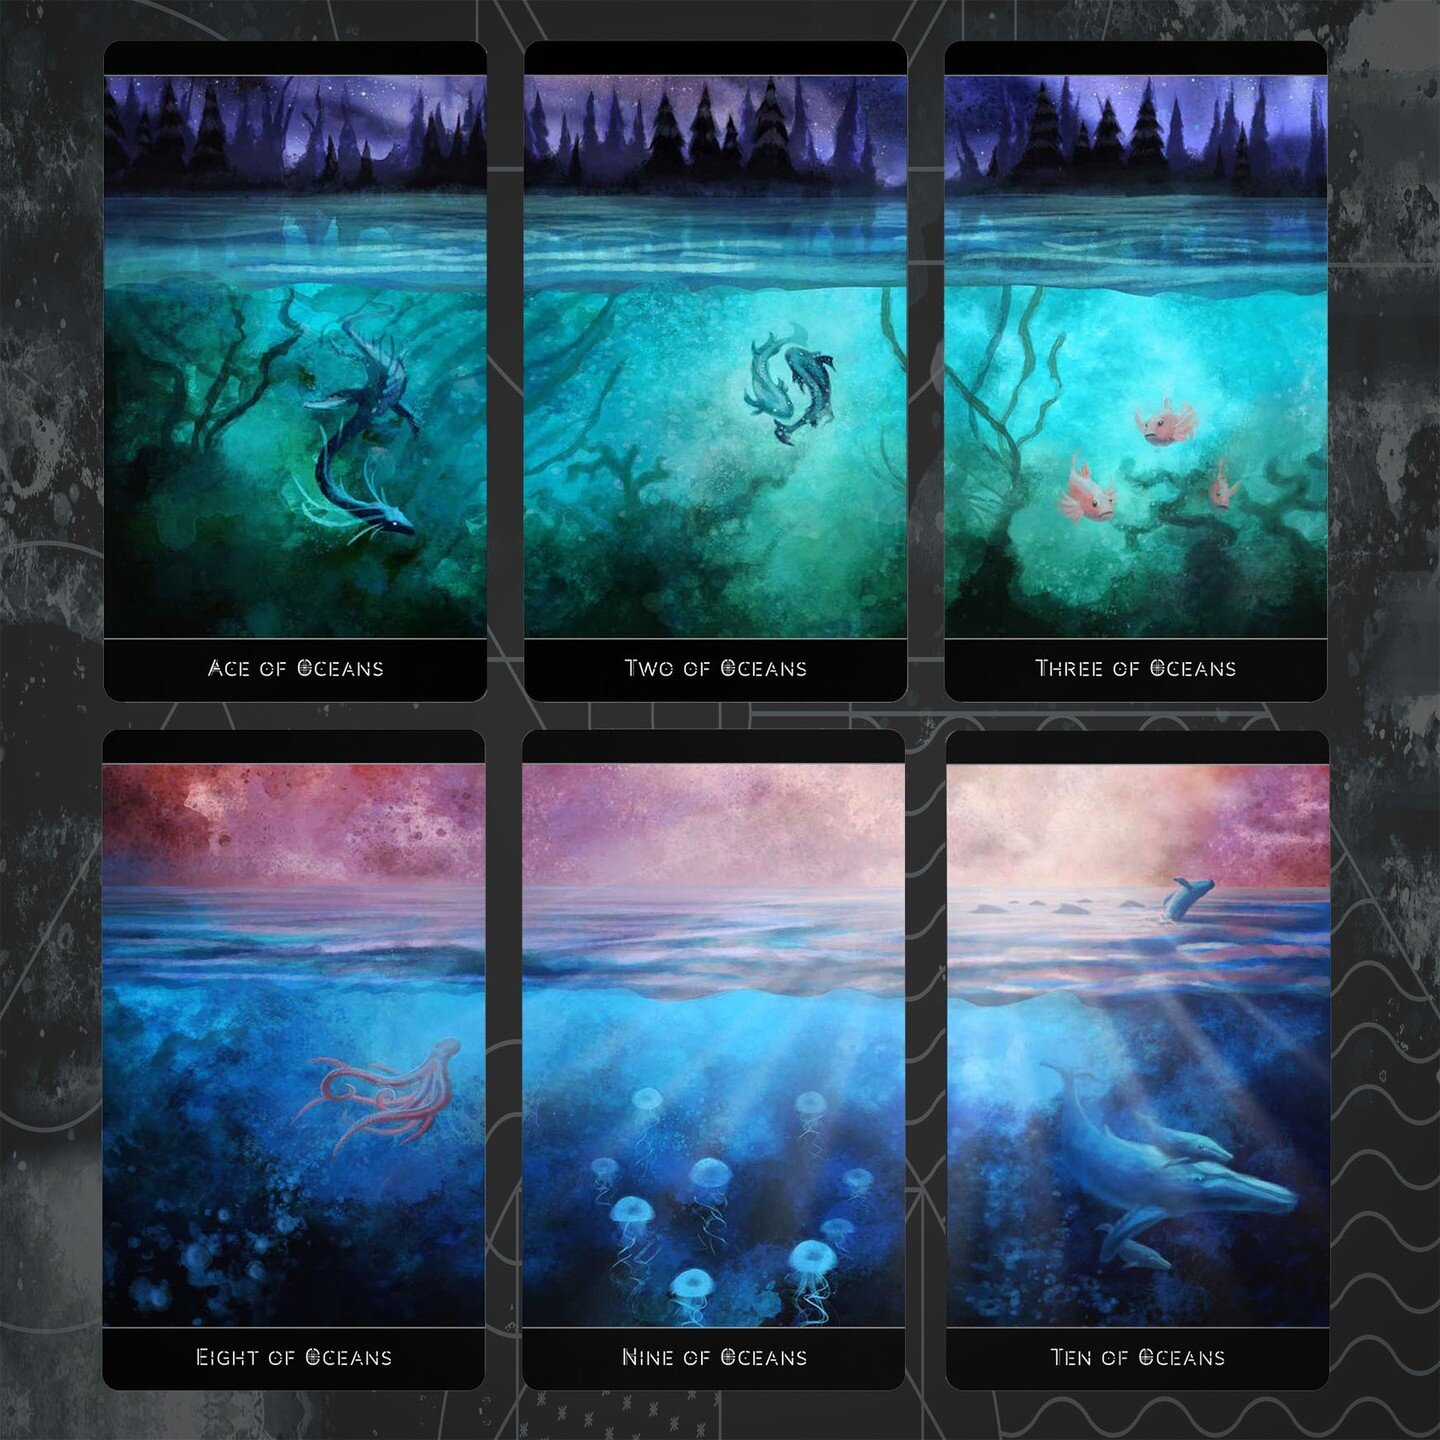 The 3rd edition of The Lost Forest launches tomorrow! Here's a preview of some of the artwork, starting with the Oceans suit, which received no changes as I was pretty happy with it... #thelostforesttarot #lostforesttarot #indietarot #indietarotdeck 